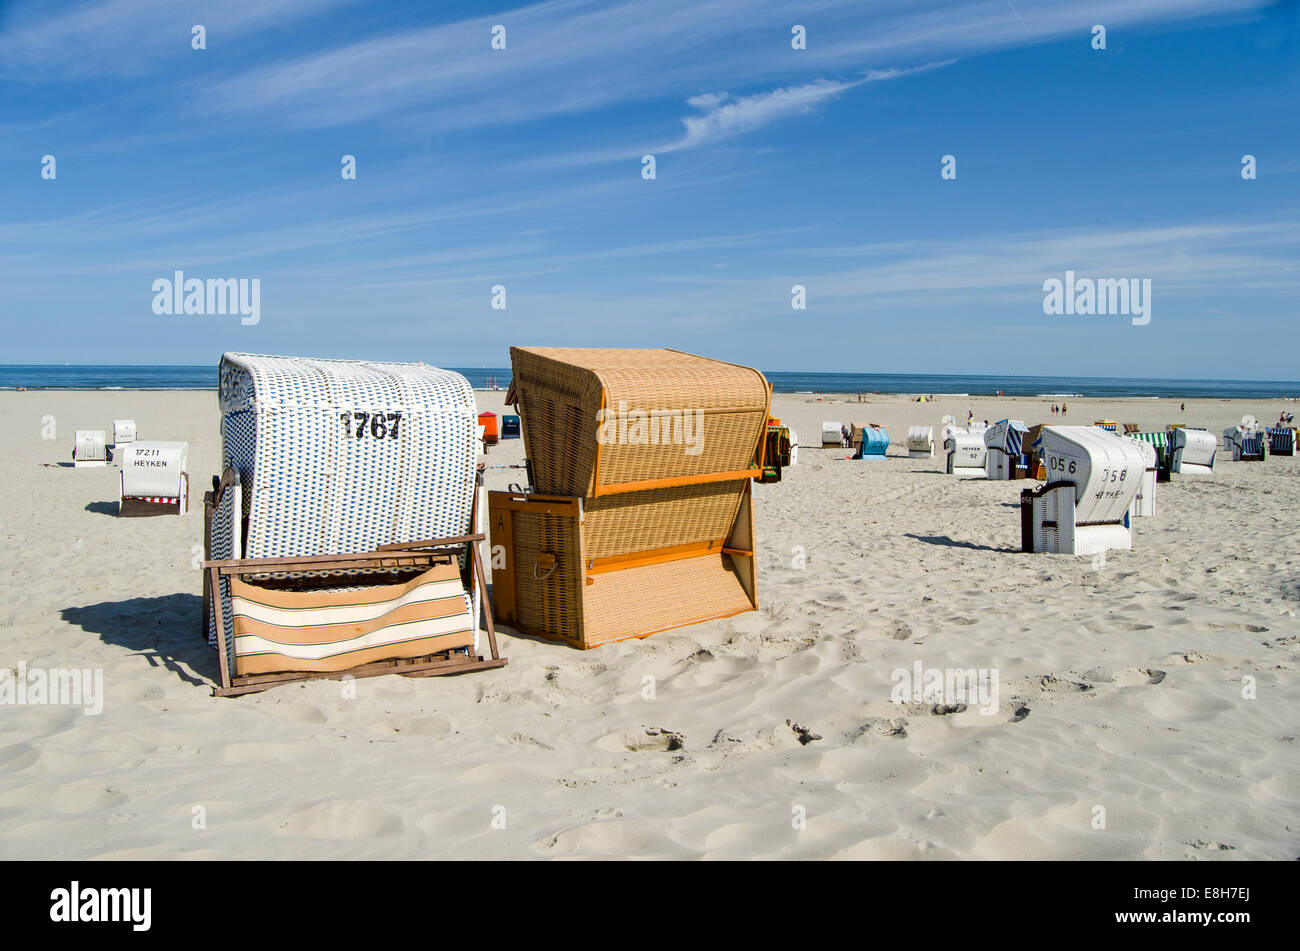 Germany, Lower Saxony, East Frisian Islands, Juist, hooded beach chairs on the beach Stock Photo